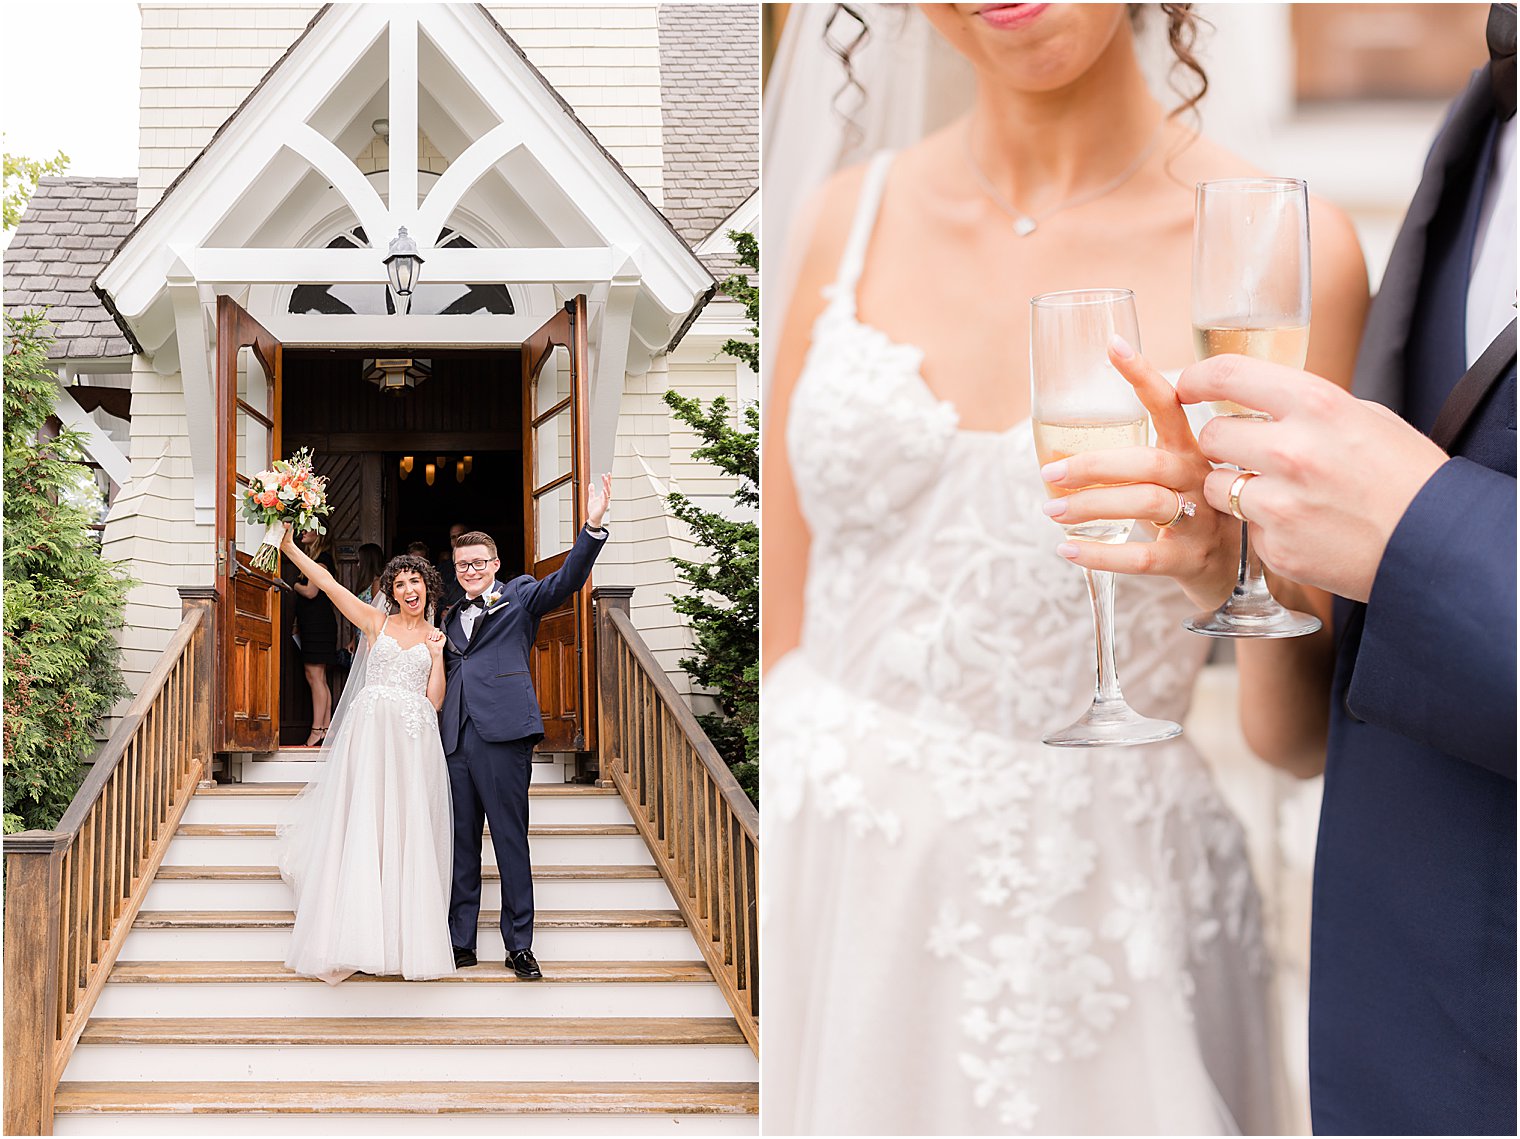  newlyweds cheer on steps of church and toast signature drinks